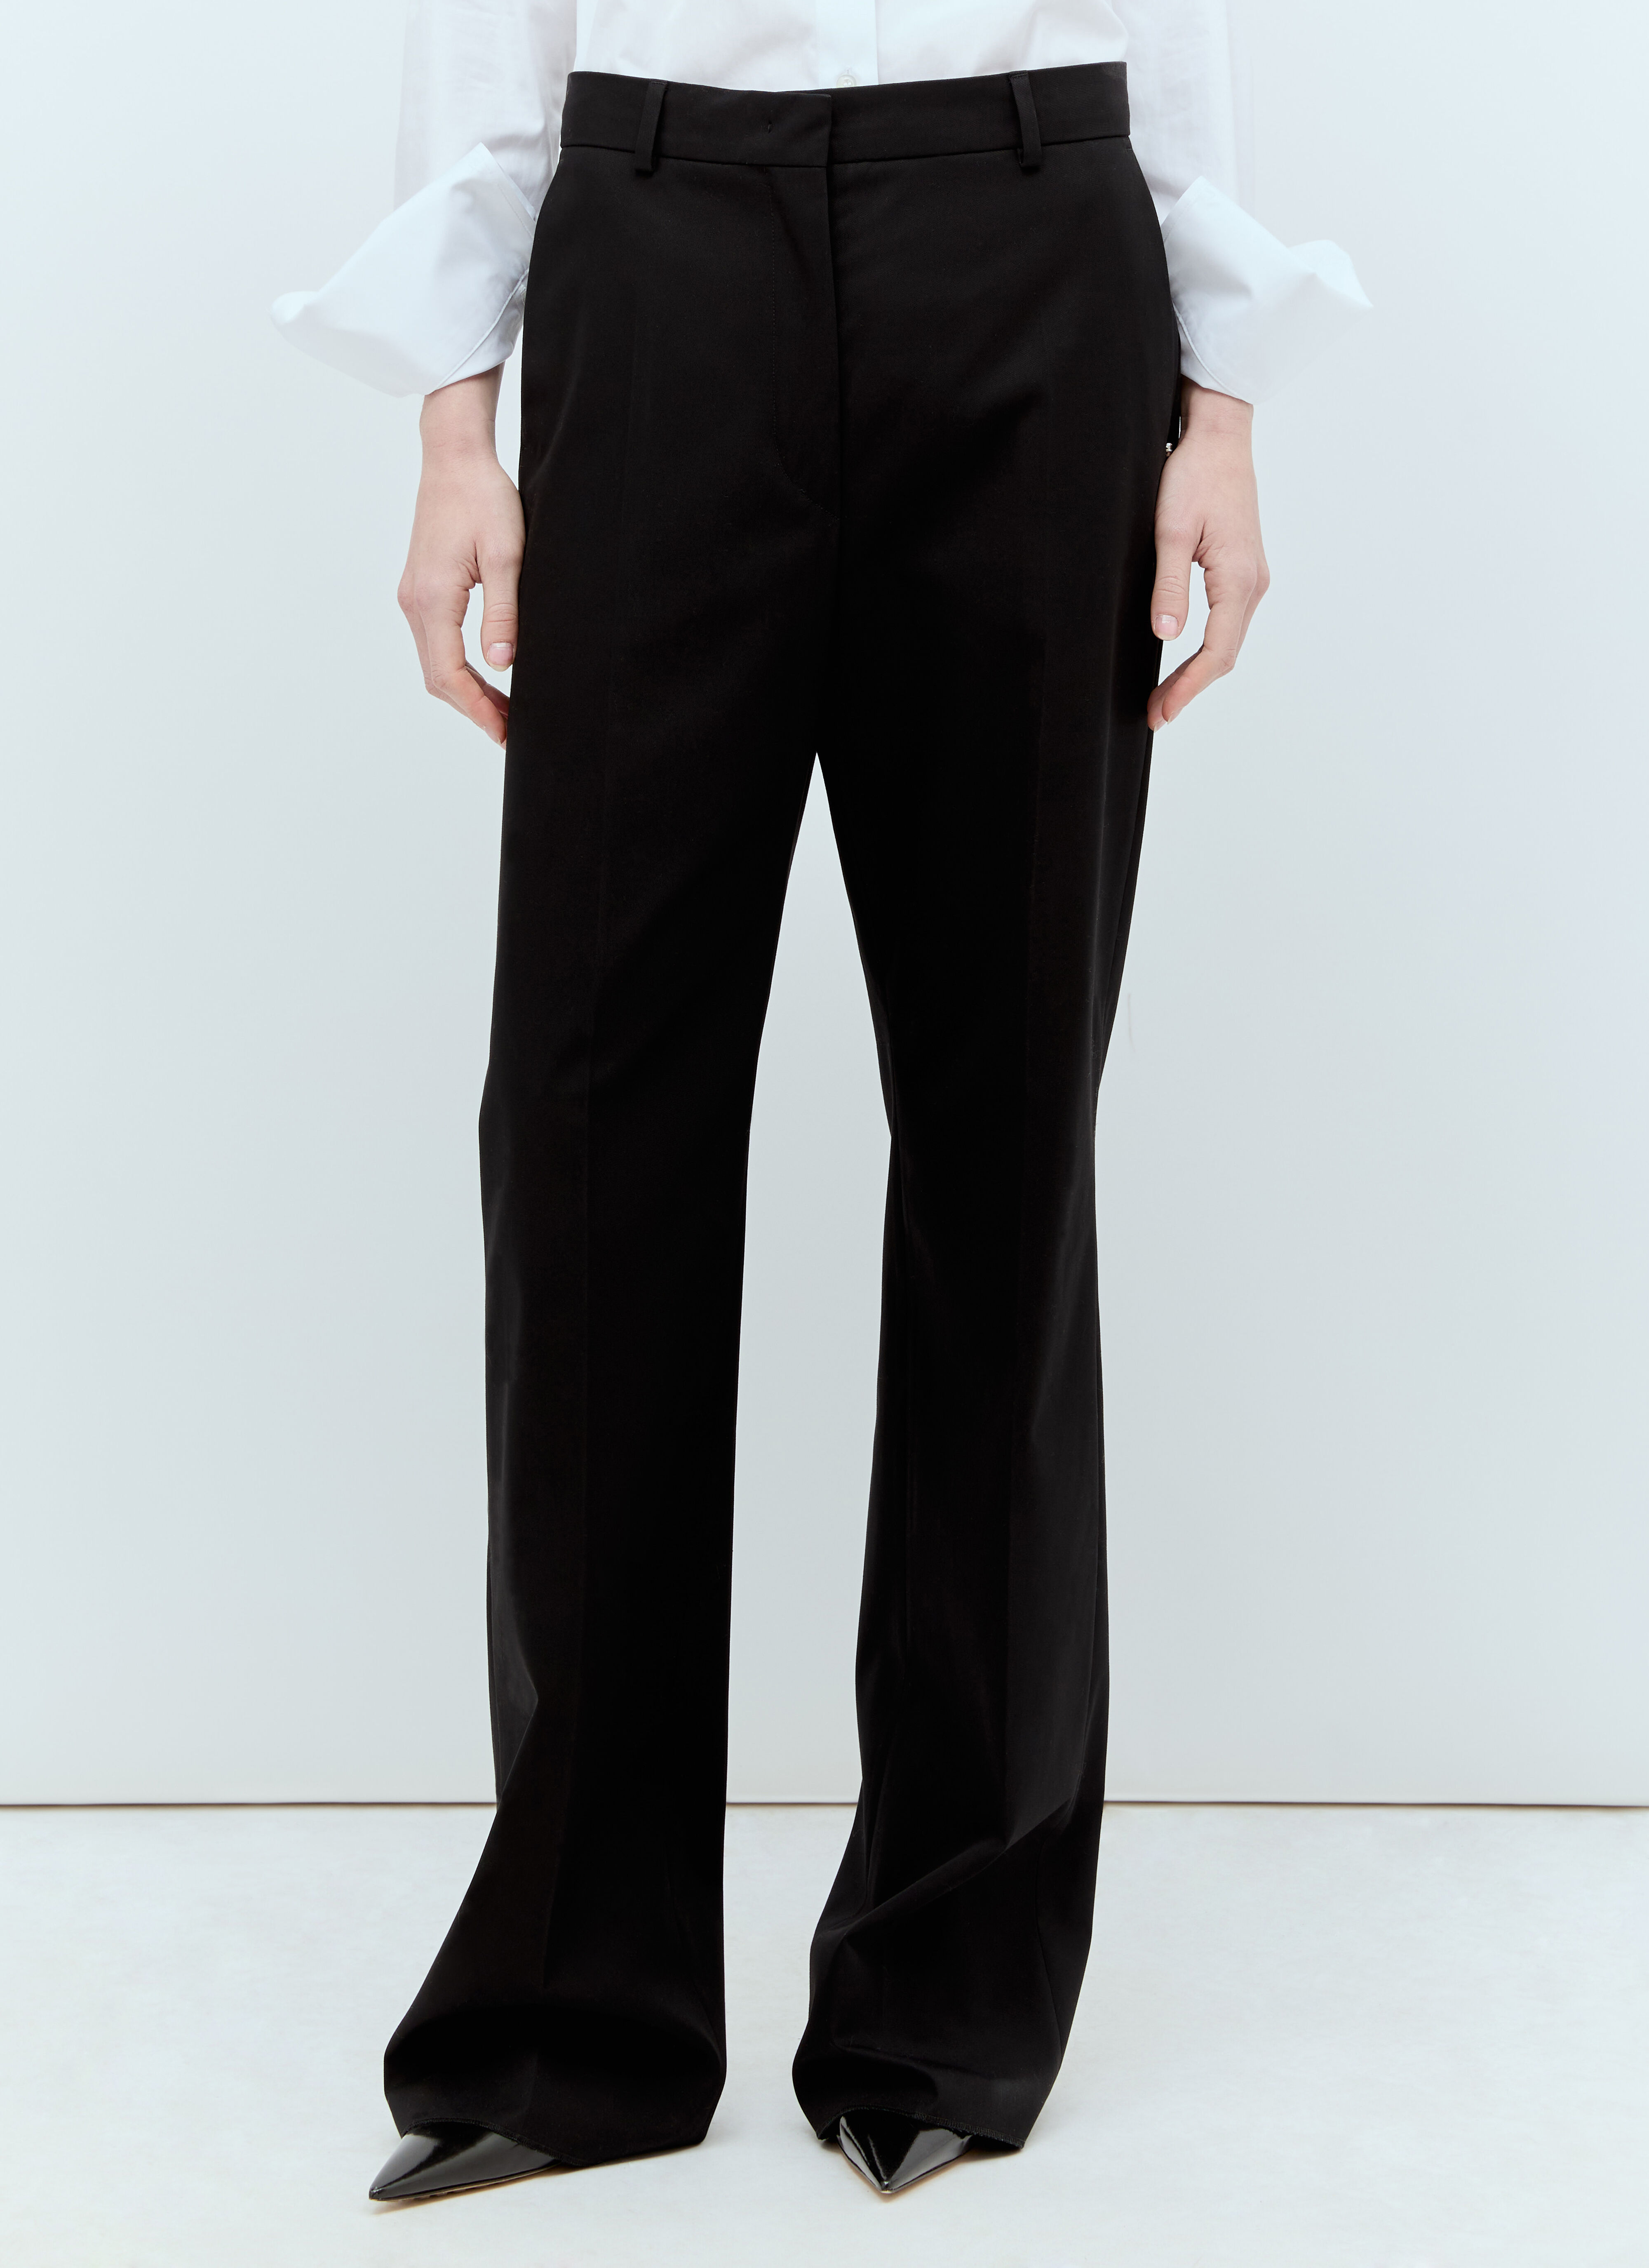 Sportmax Tailored Twill Pants White spx0256003